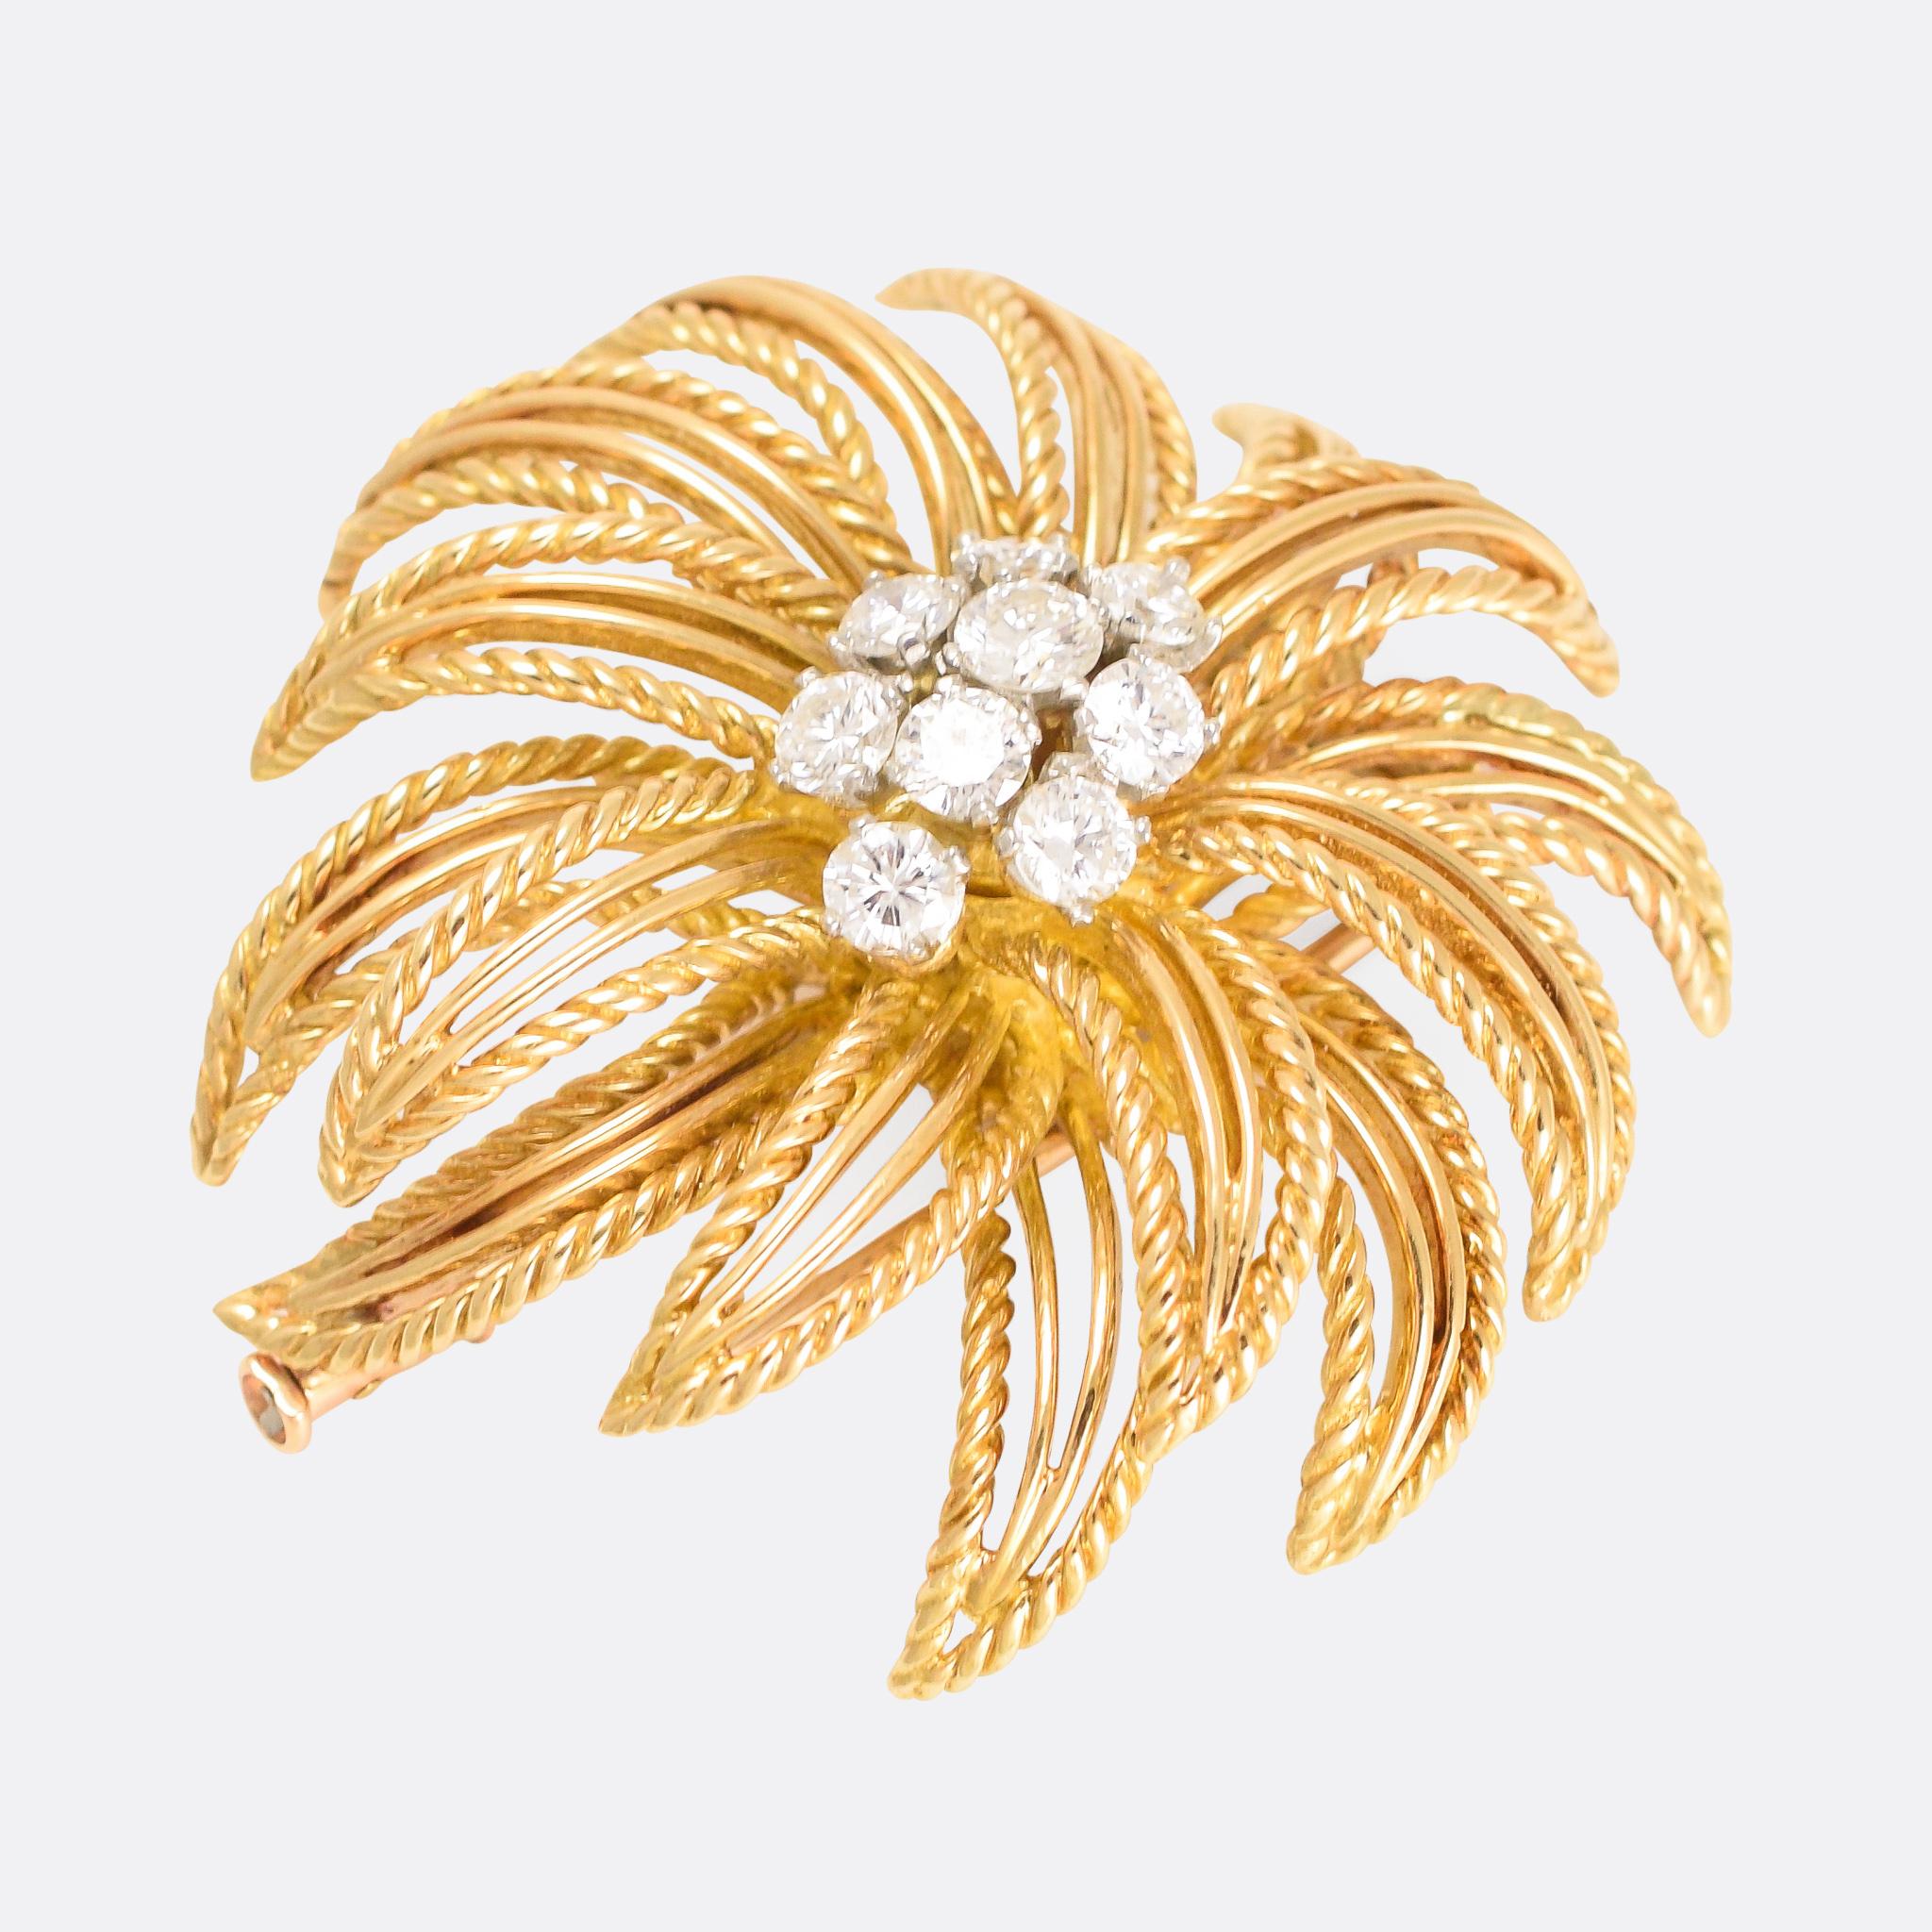 A breathtaking 1950s flower brooch by Boucheron of Paris. The quality throughout is superb, with openworked petals and a central cluster of 9 brilliant cut diamonds (total carat weight 1.55ct). It's crafted in 18k gold, and signed BOUCHERON Made in